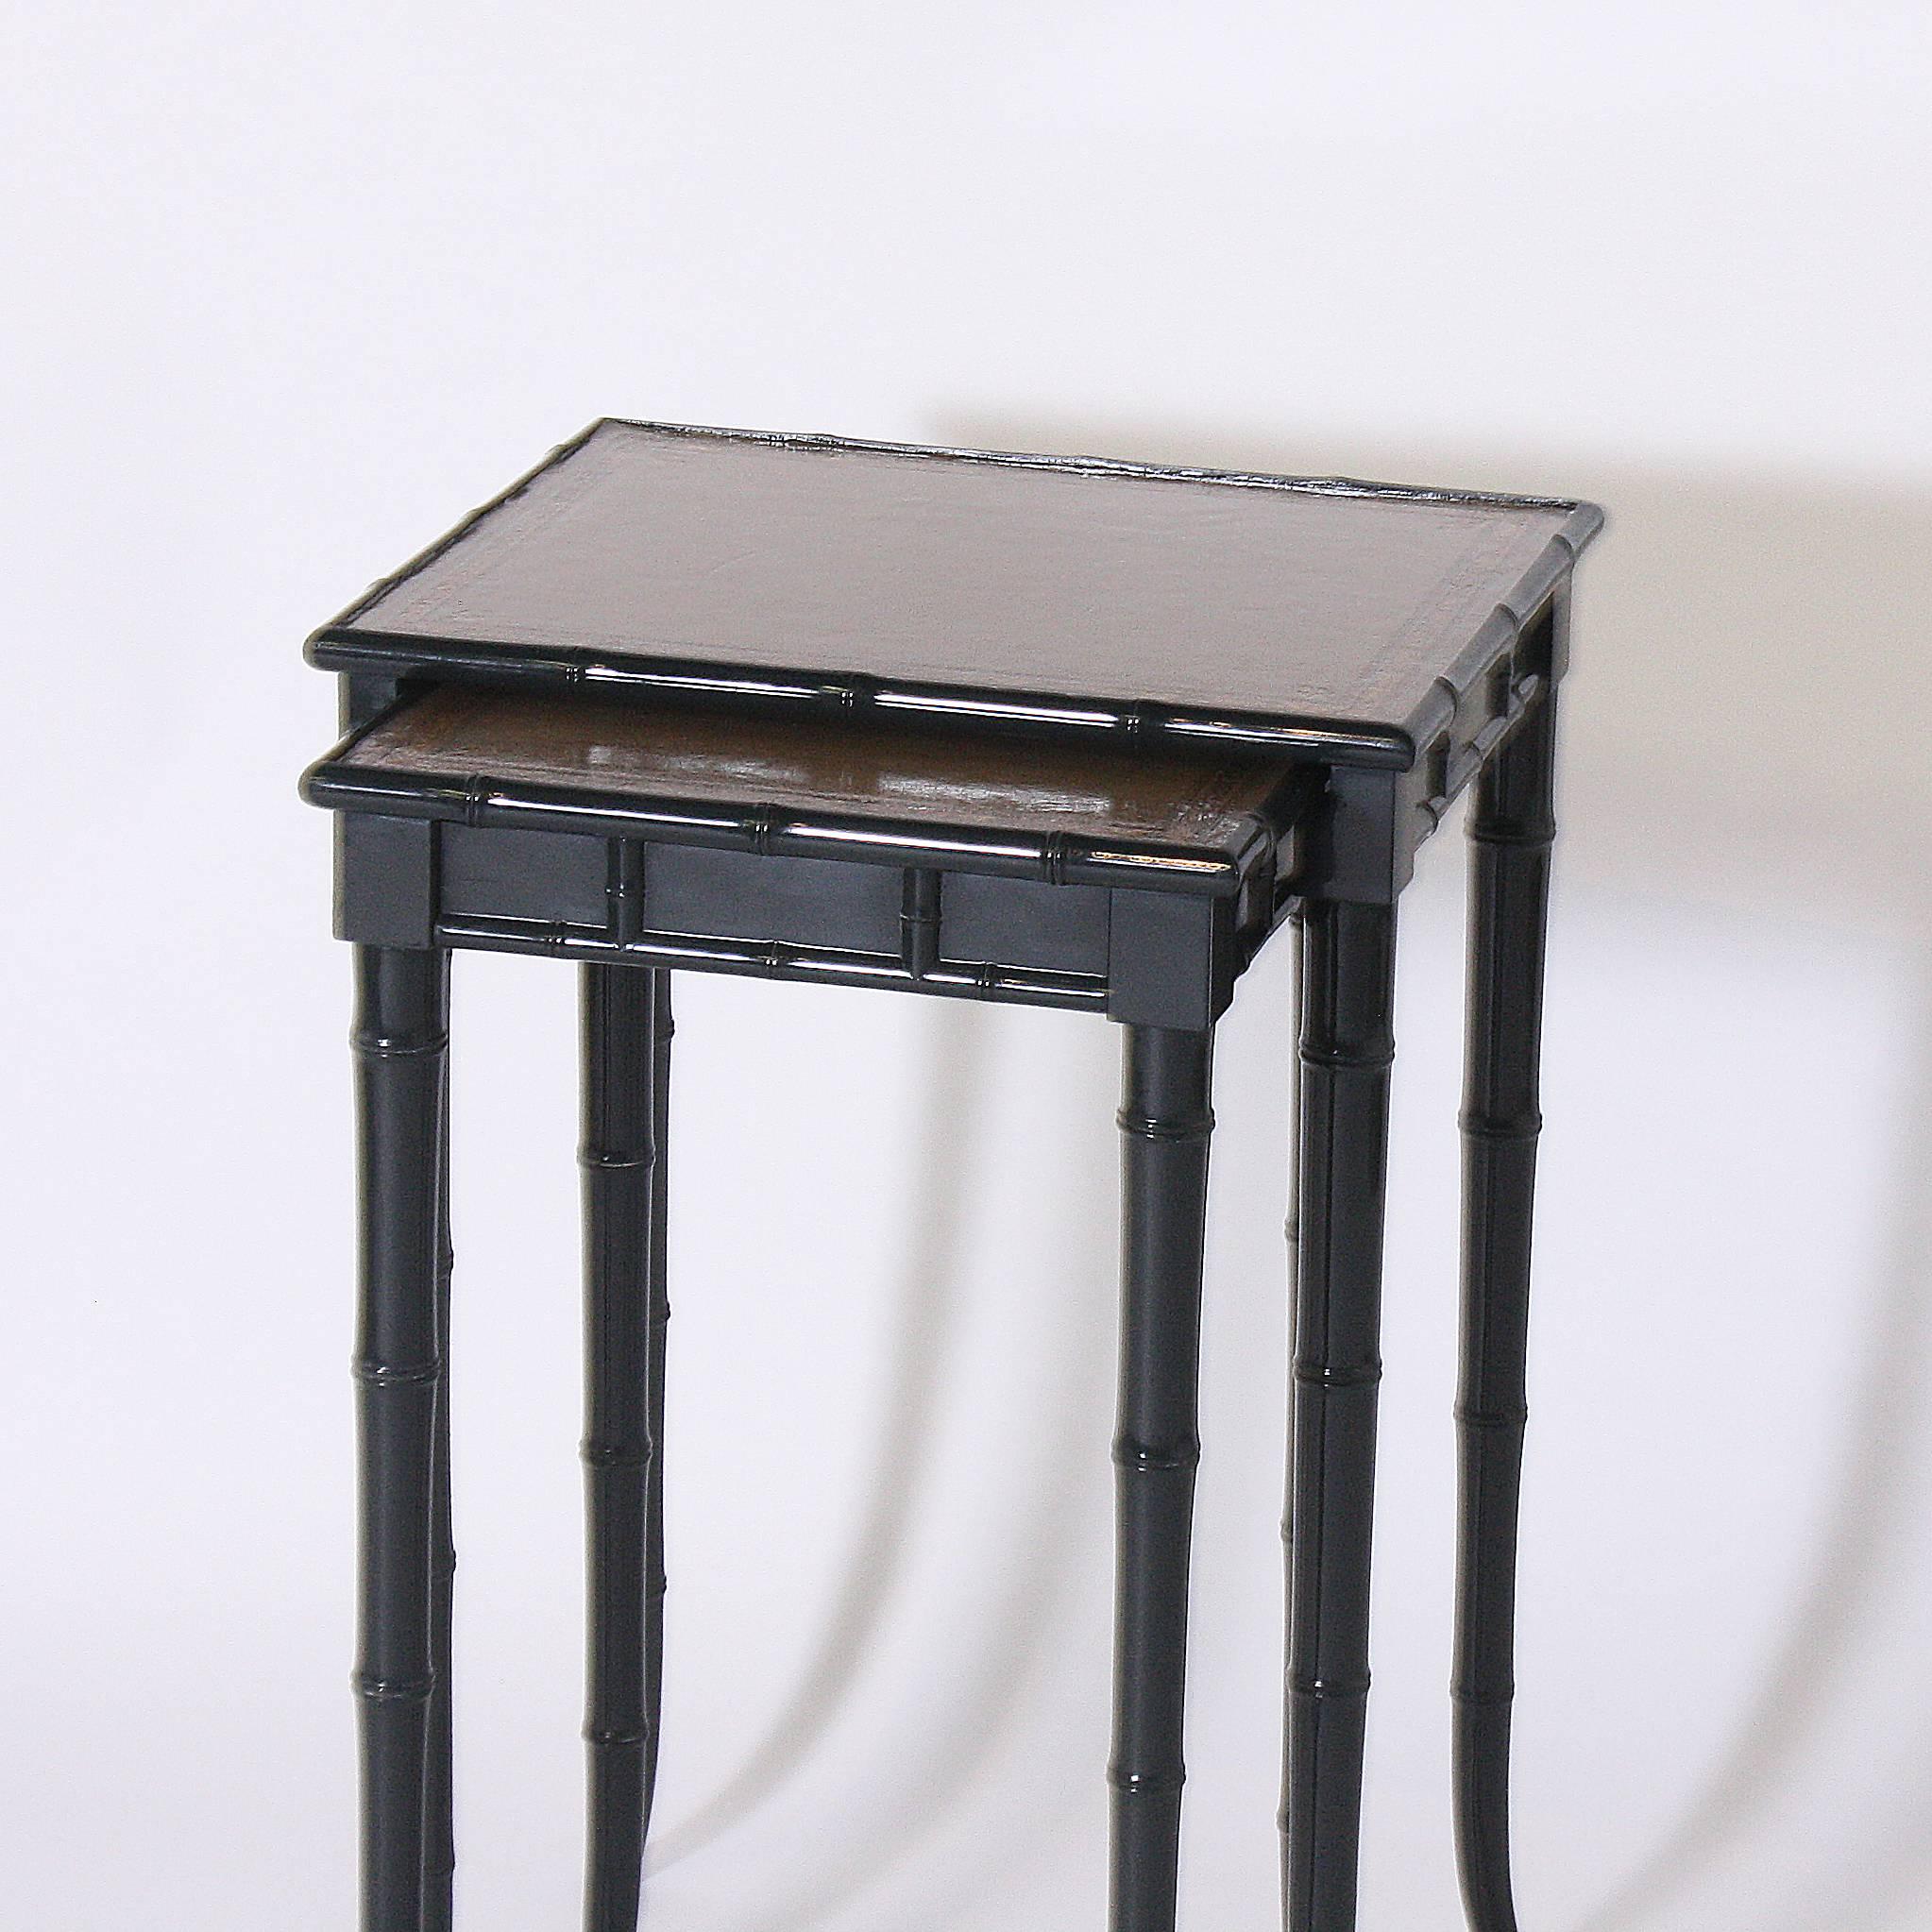 This set of faux bamboo nesting tables have been re painted in Benjamin Moore, black forest green. The leather tops are original and have been lacquered to prevent any further antiquing.

Measures: Large table: 17